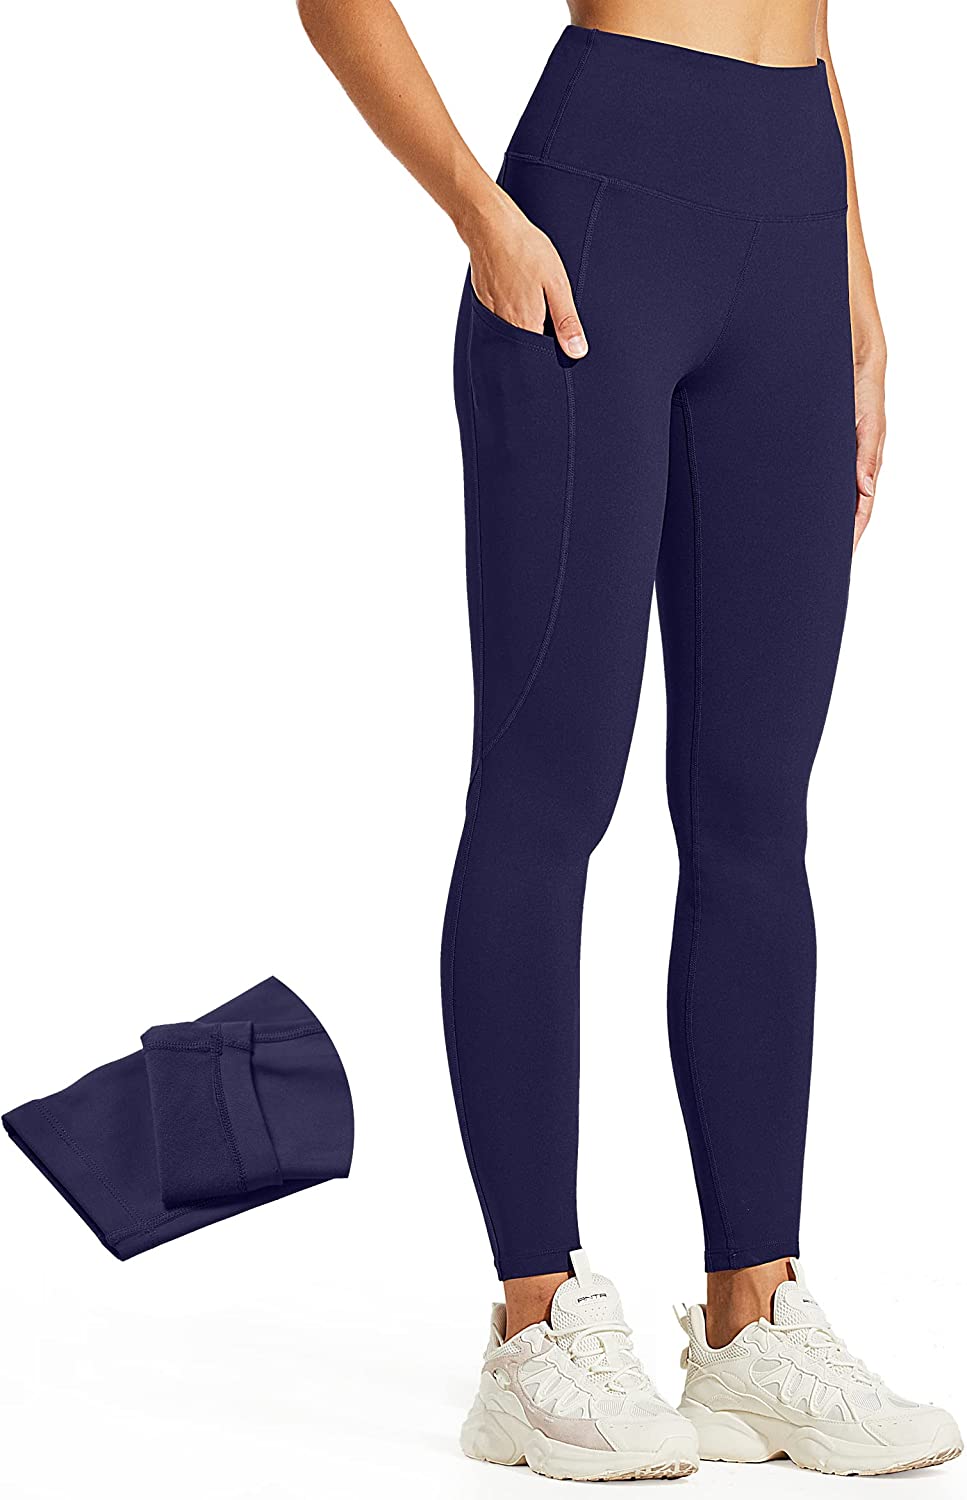 ZUTY Fleece Lined Leggings Women Water Resistant Winter Thermal Insulated  High Waisted Hiking Leggings Pockets Plus Size